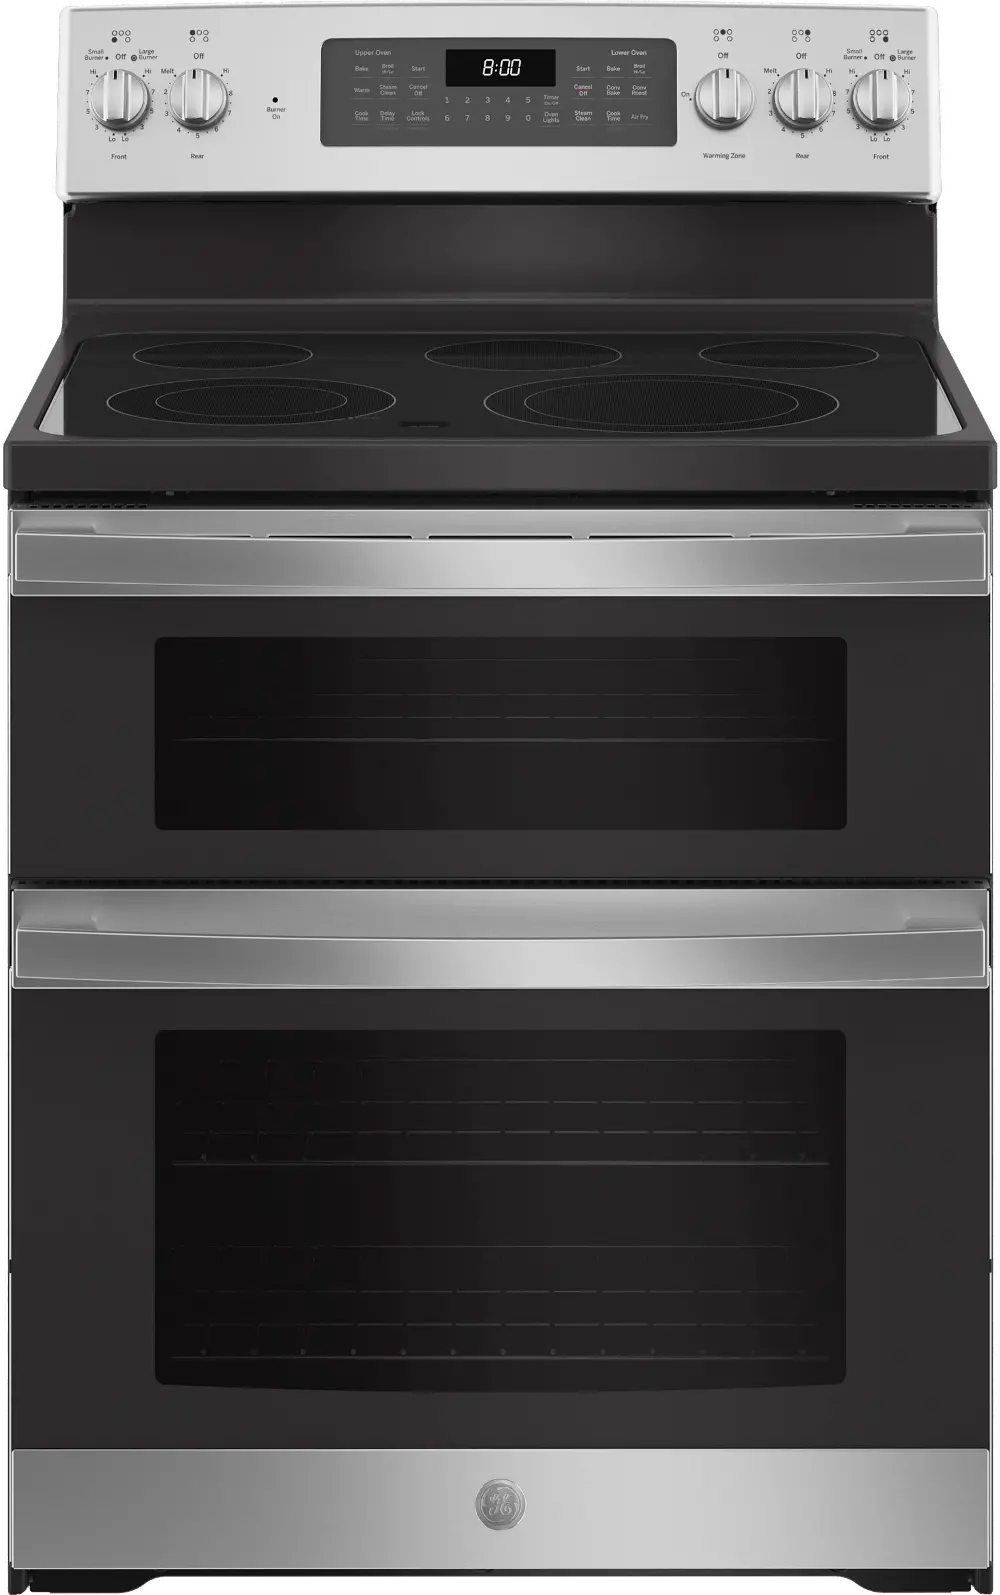 JBS86SPSS GE Double Oven Electric Range - Stainless Steel-1